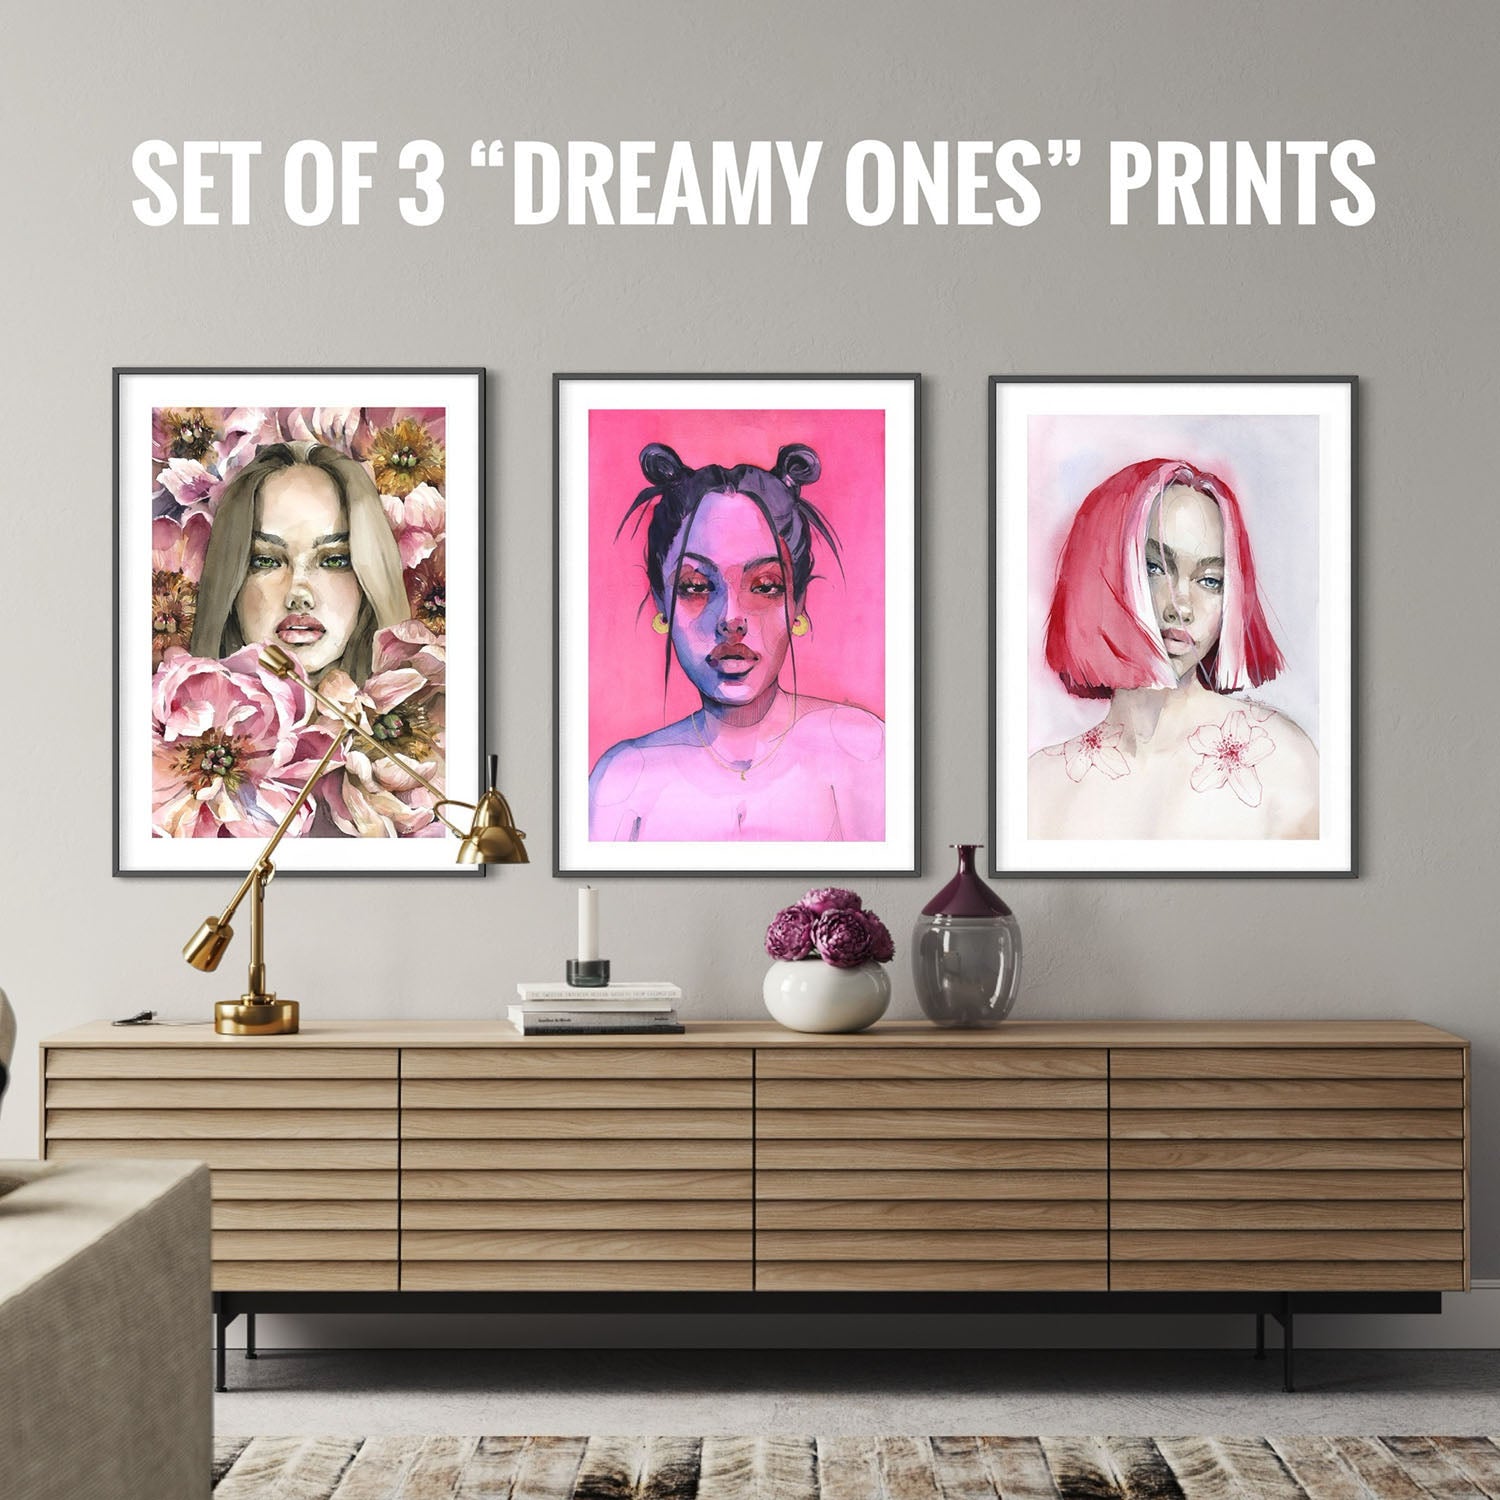 set of 3 prints from the Dreamy Ones collection by Polina Bright